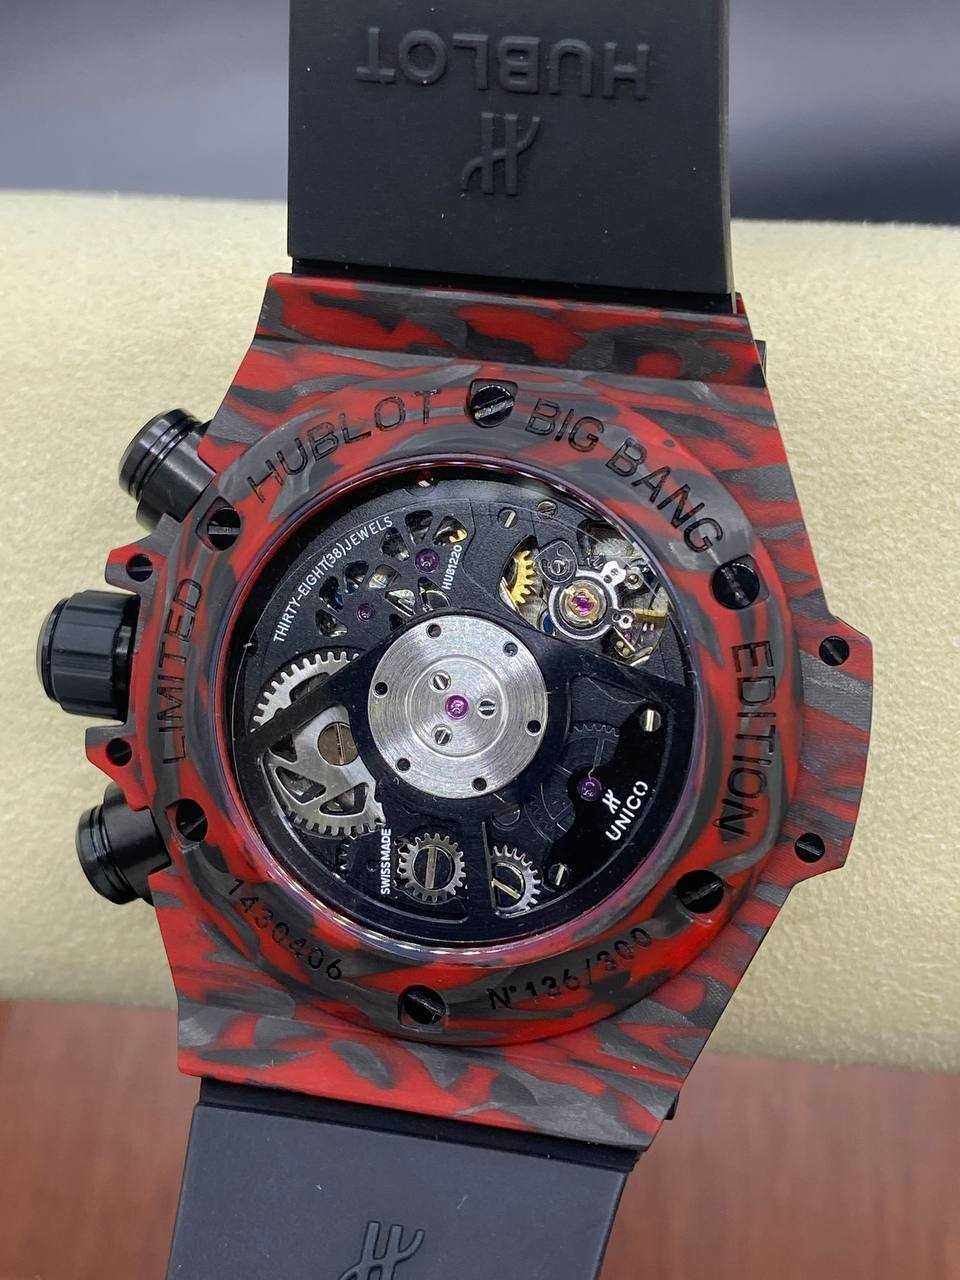 H-blot Big Bang Unico Red Carbon Alex Ovechkin Limited Edition